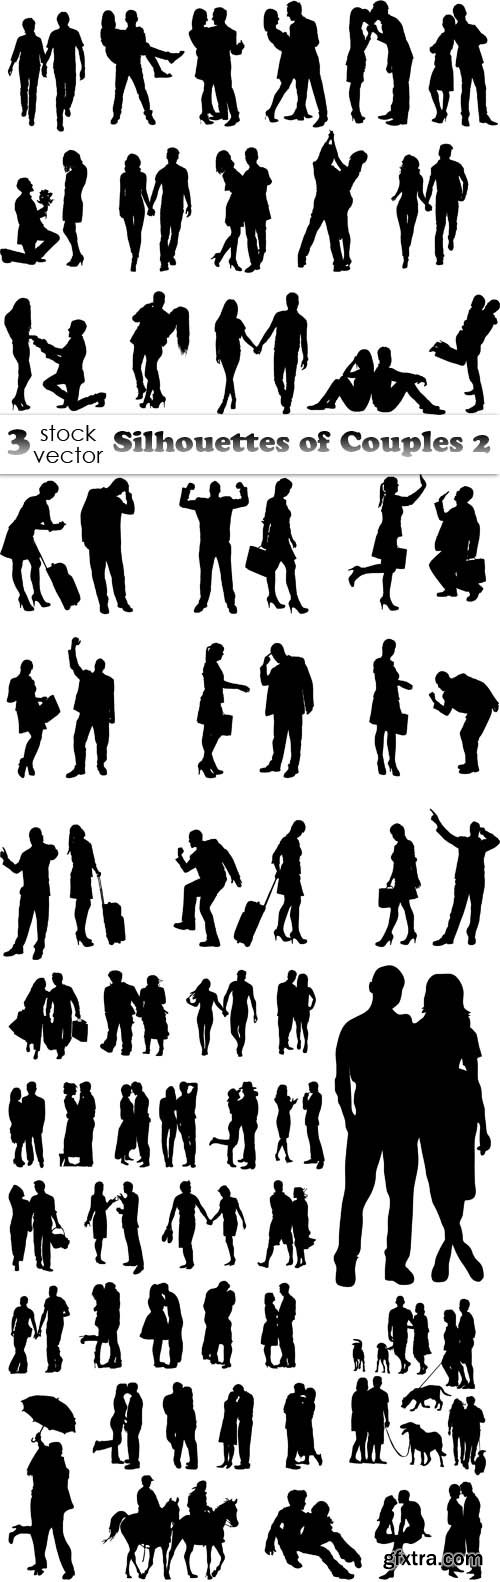 Vectors - Silhouettes of Couples 2